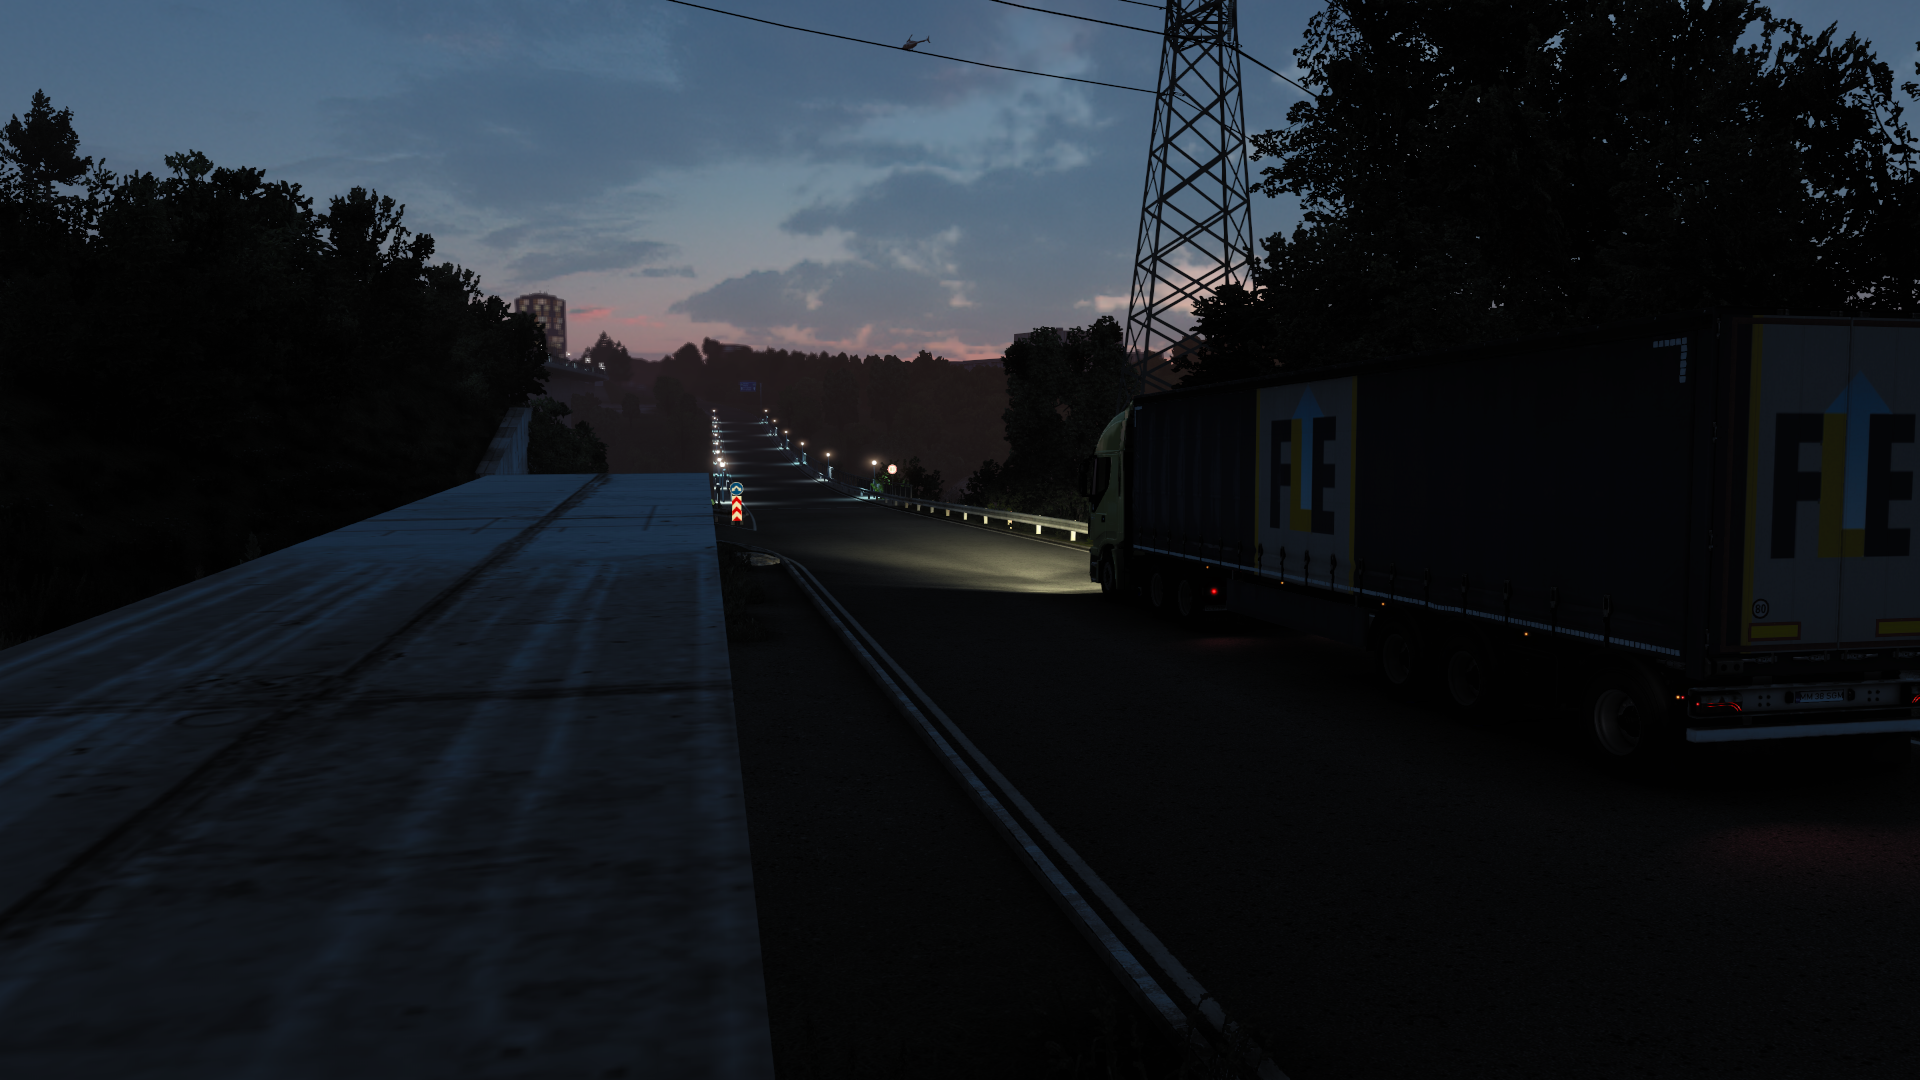 ets2_20210228_001027_00.png